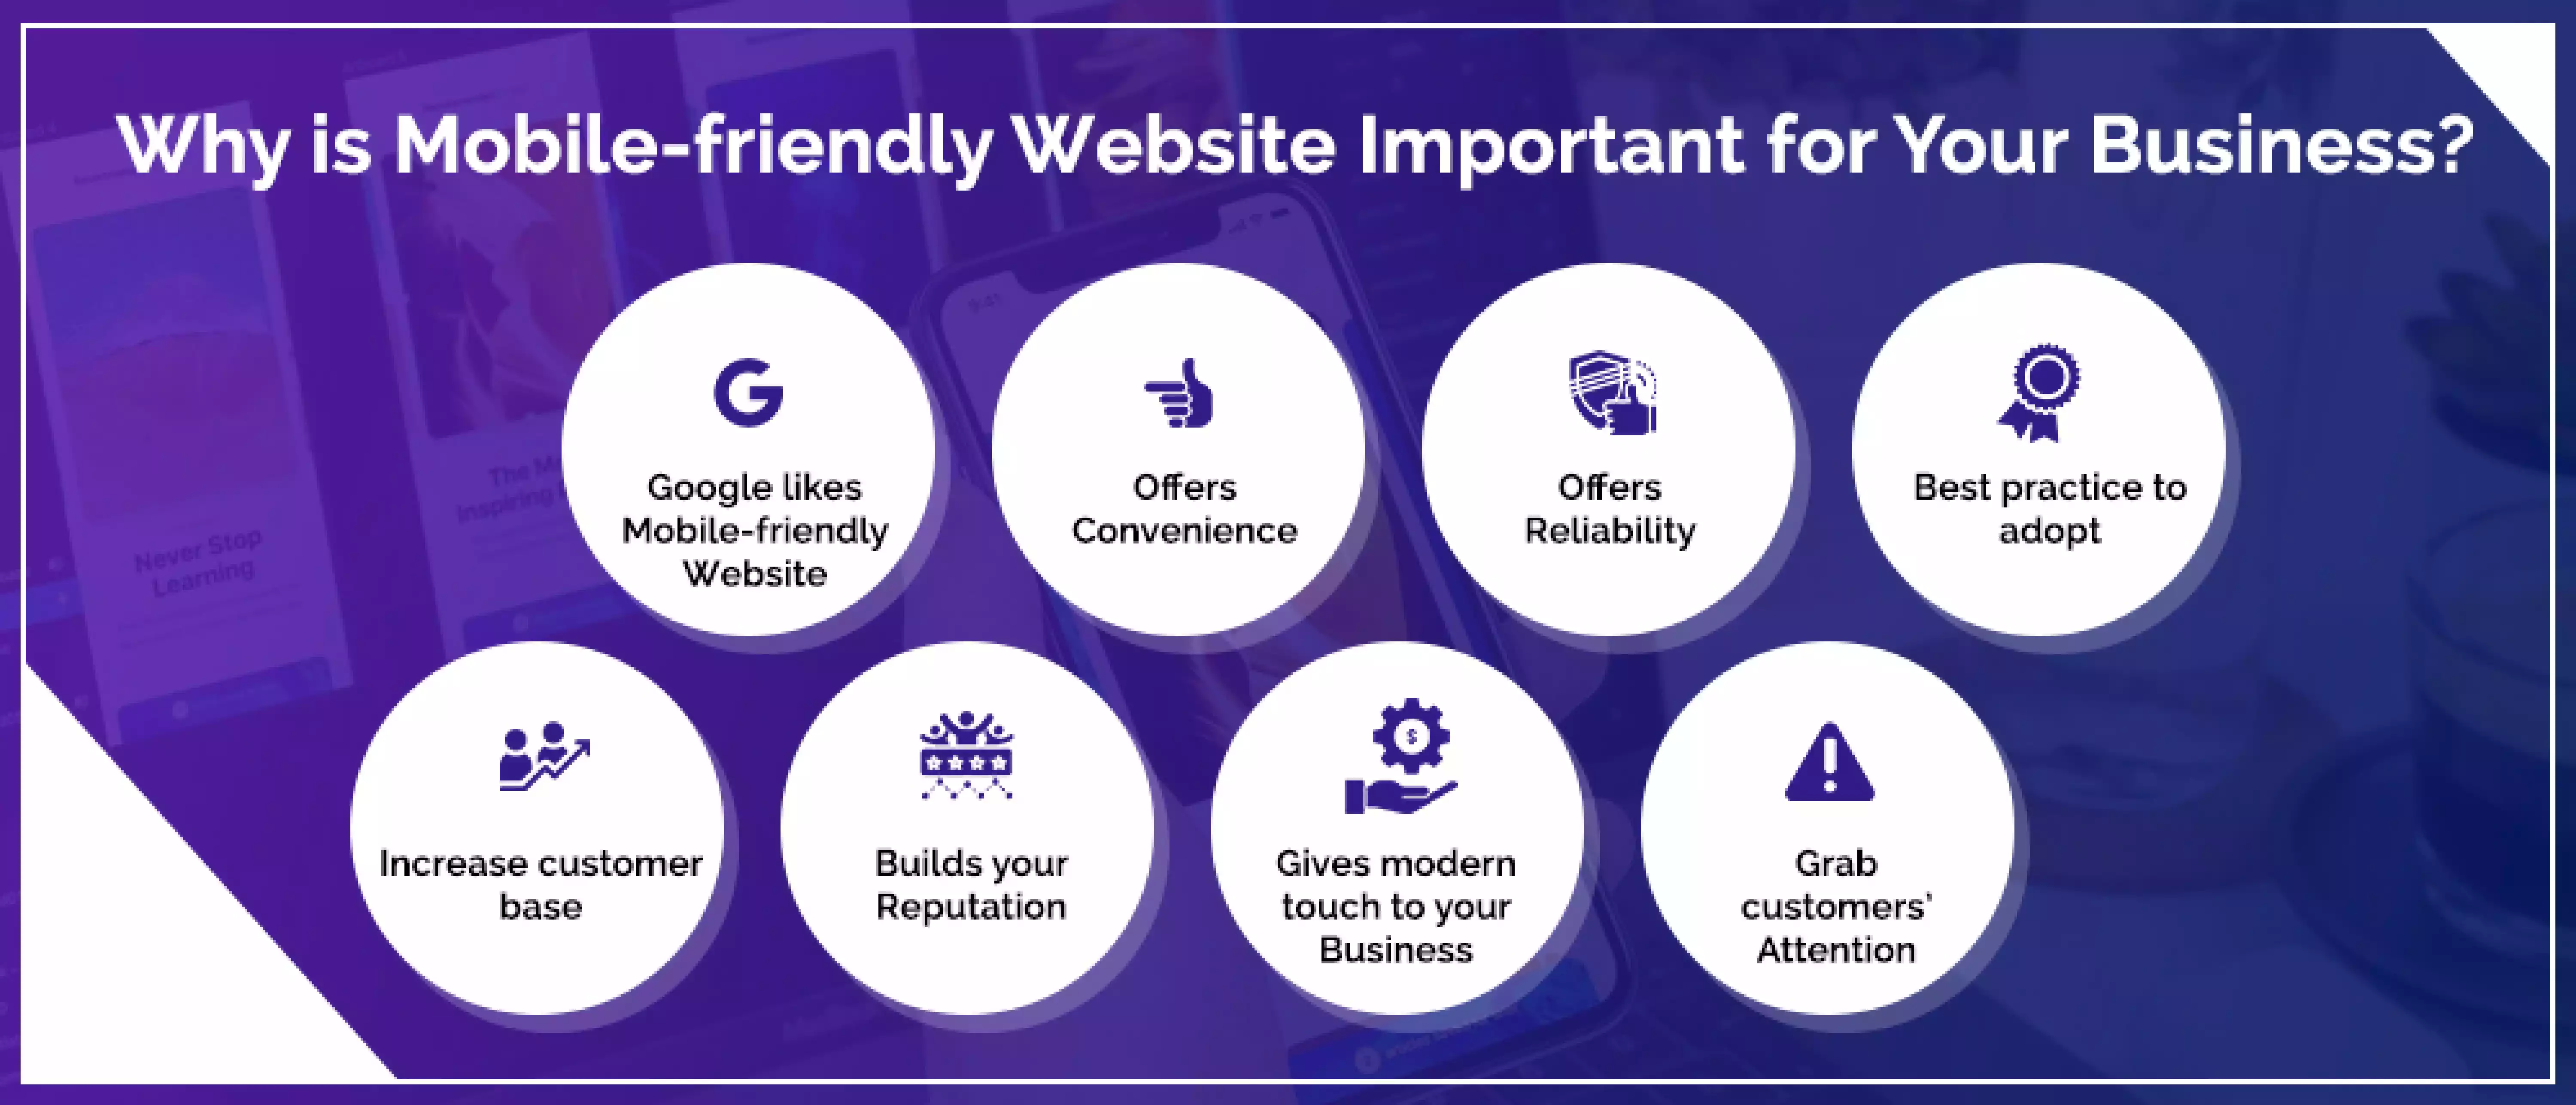 Why is Mobile-friendly Website Important for Your Business